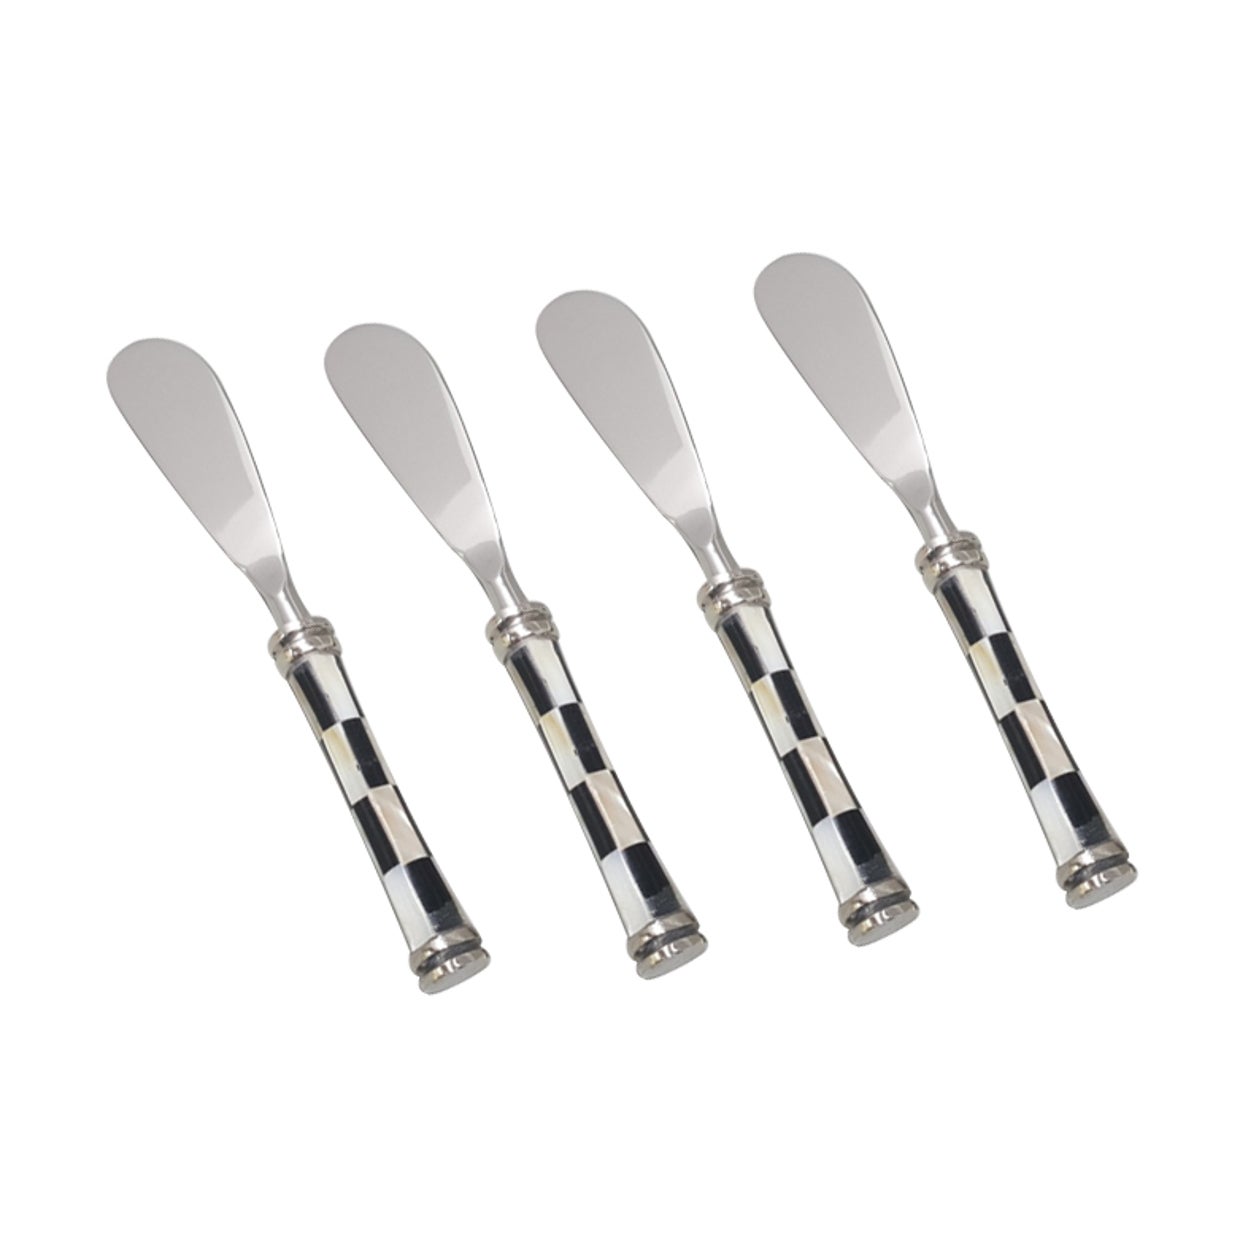 Checker Black & White Bone and Stainless Steel Spreaders (4pc per set)